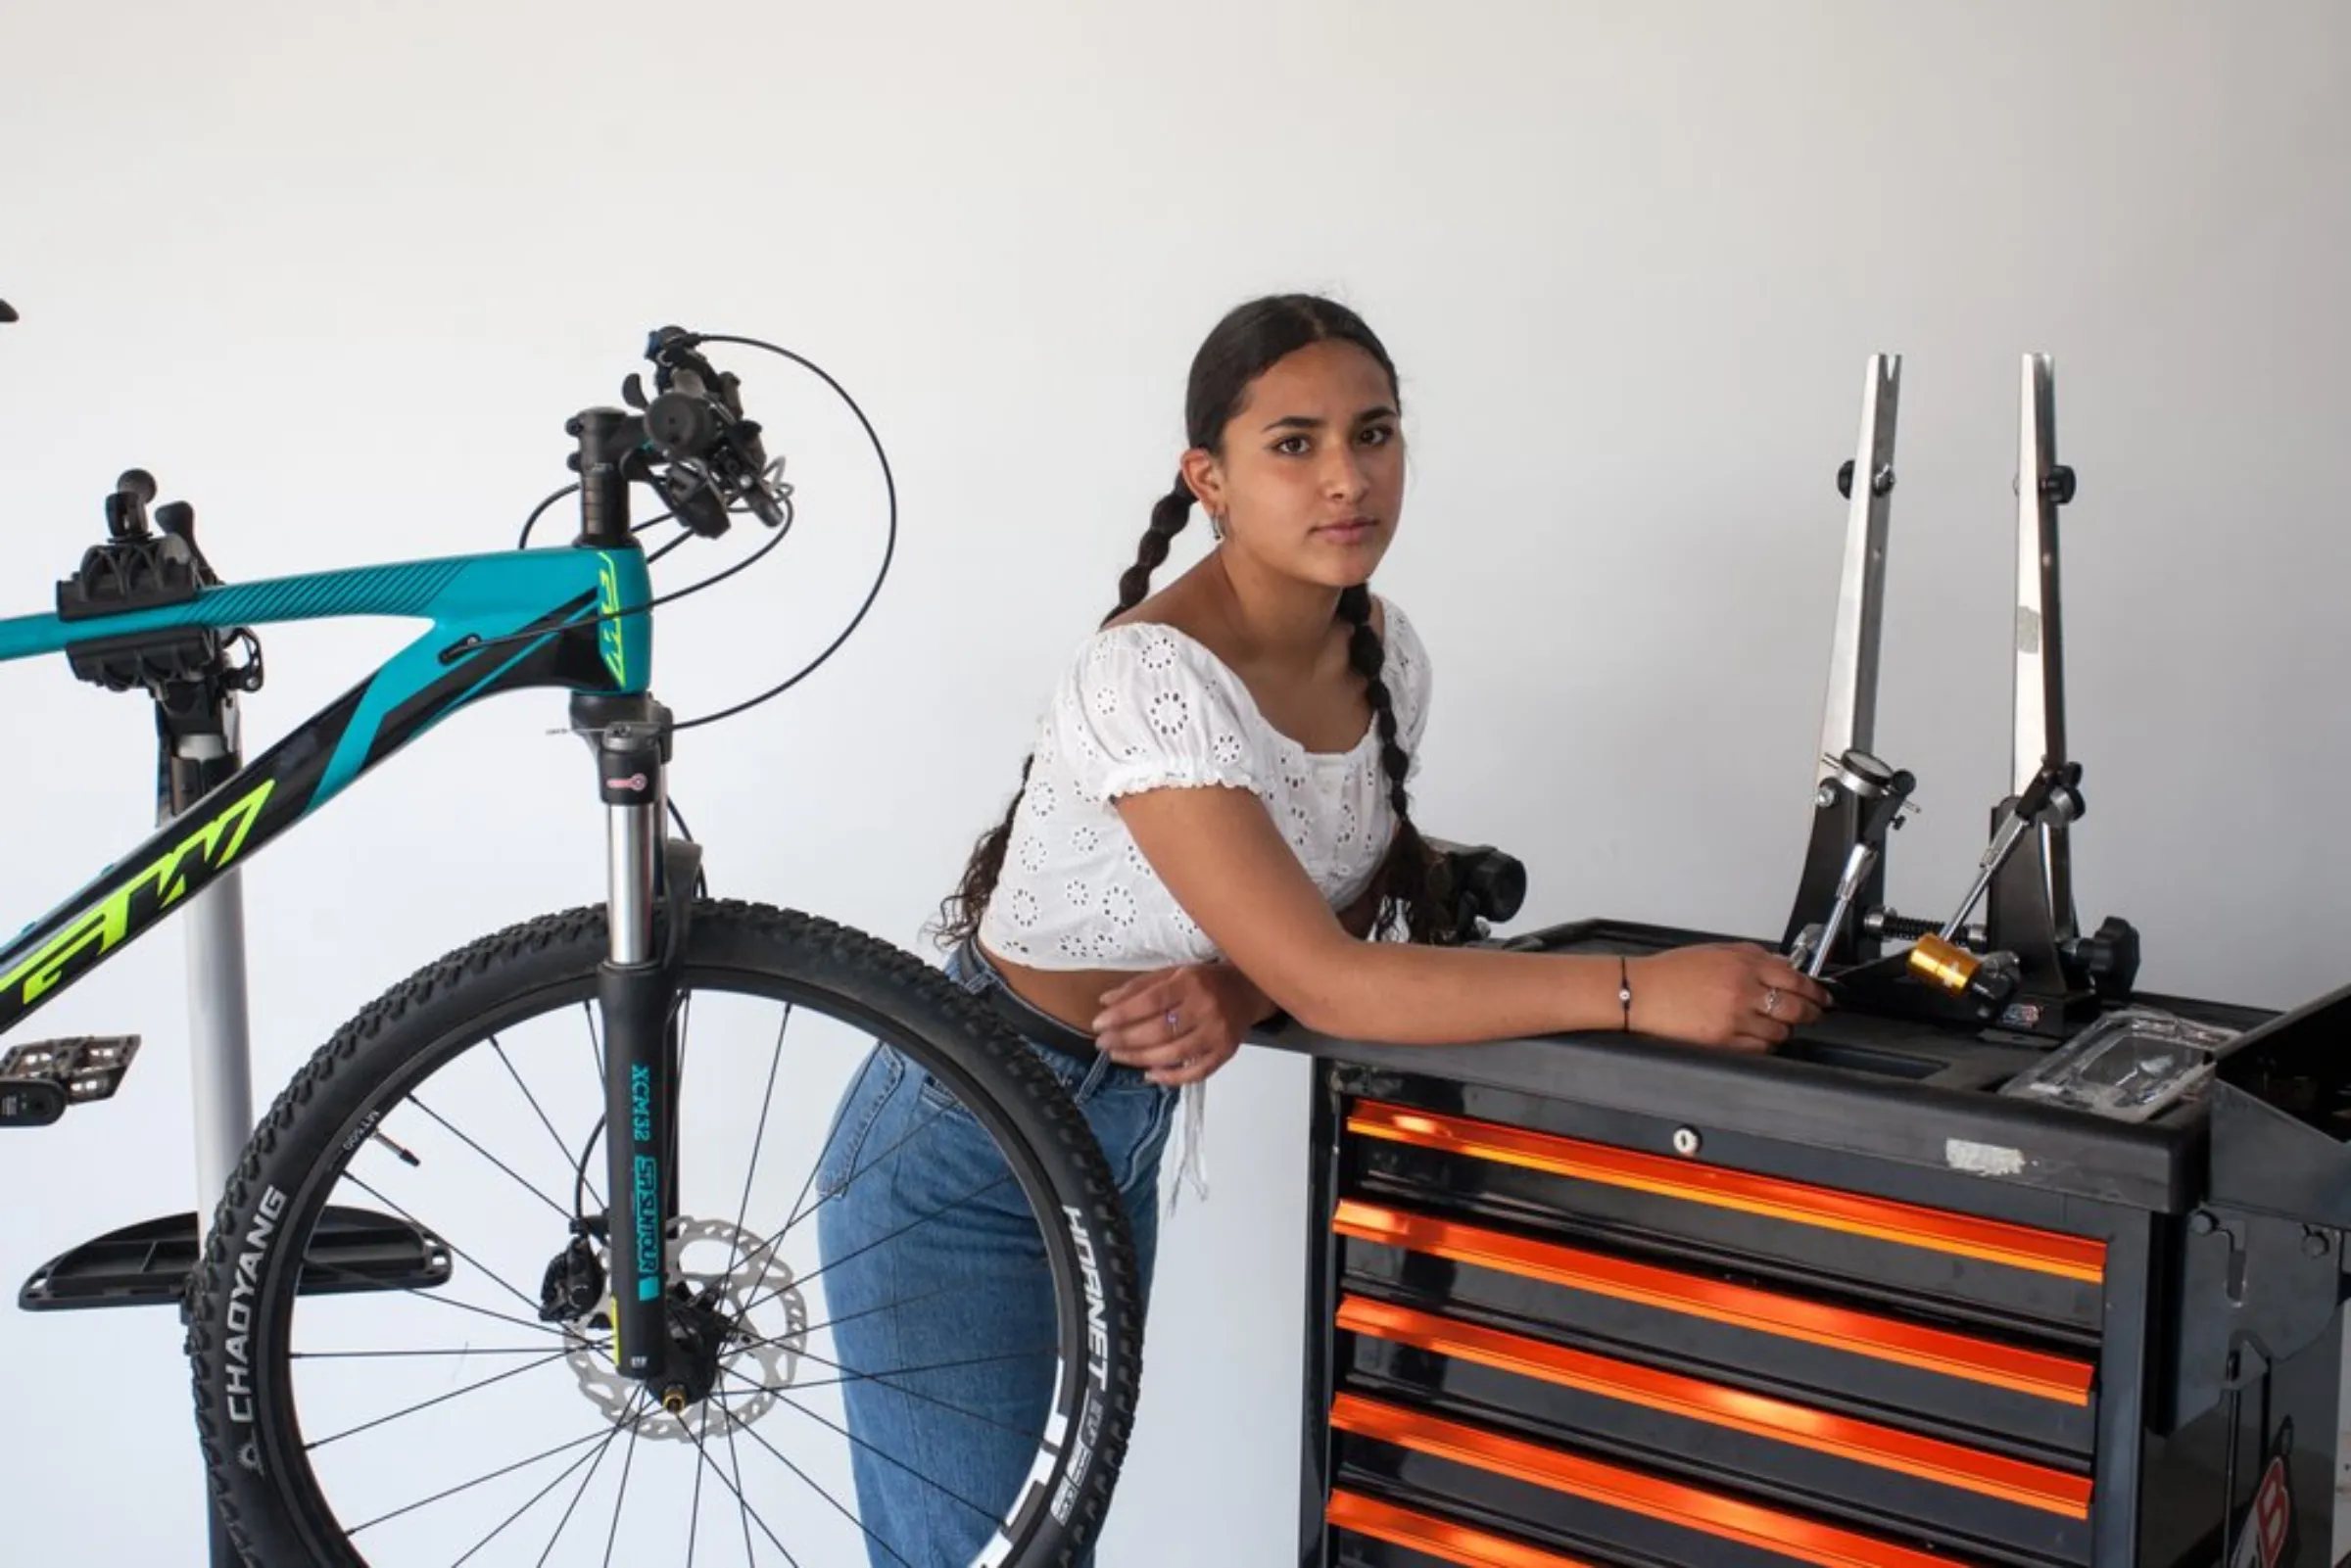 Isabella Vargas, 16, a student at “The Bike College”, a new public school in the poor neighbourhood of Bosa, stands with a bicycle and tools to repair it at the school in south Bogota, Colombia, April 22, 2021